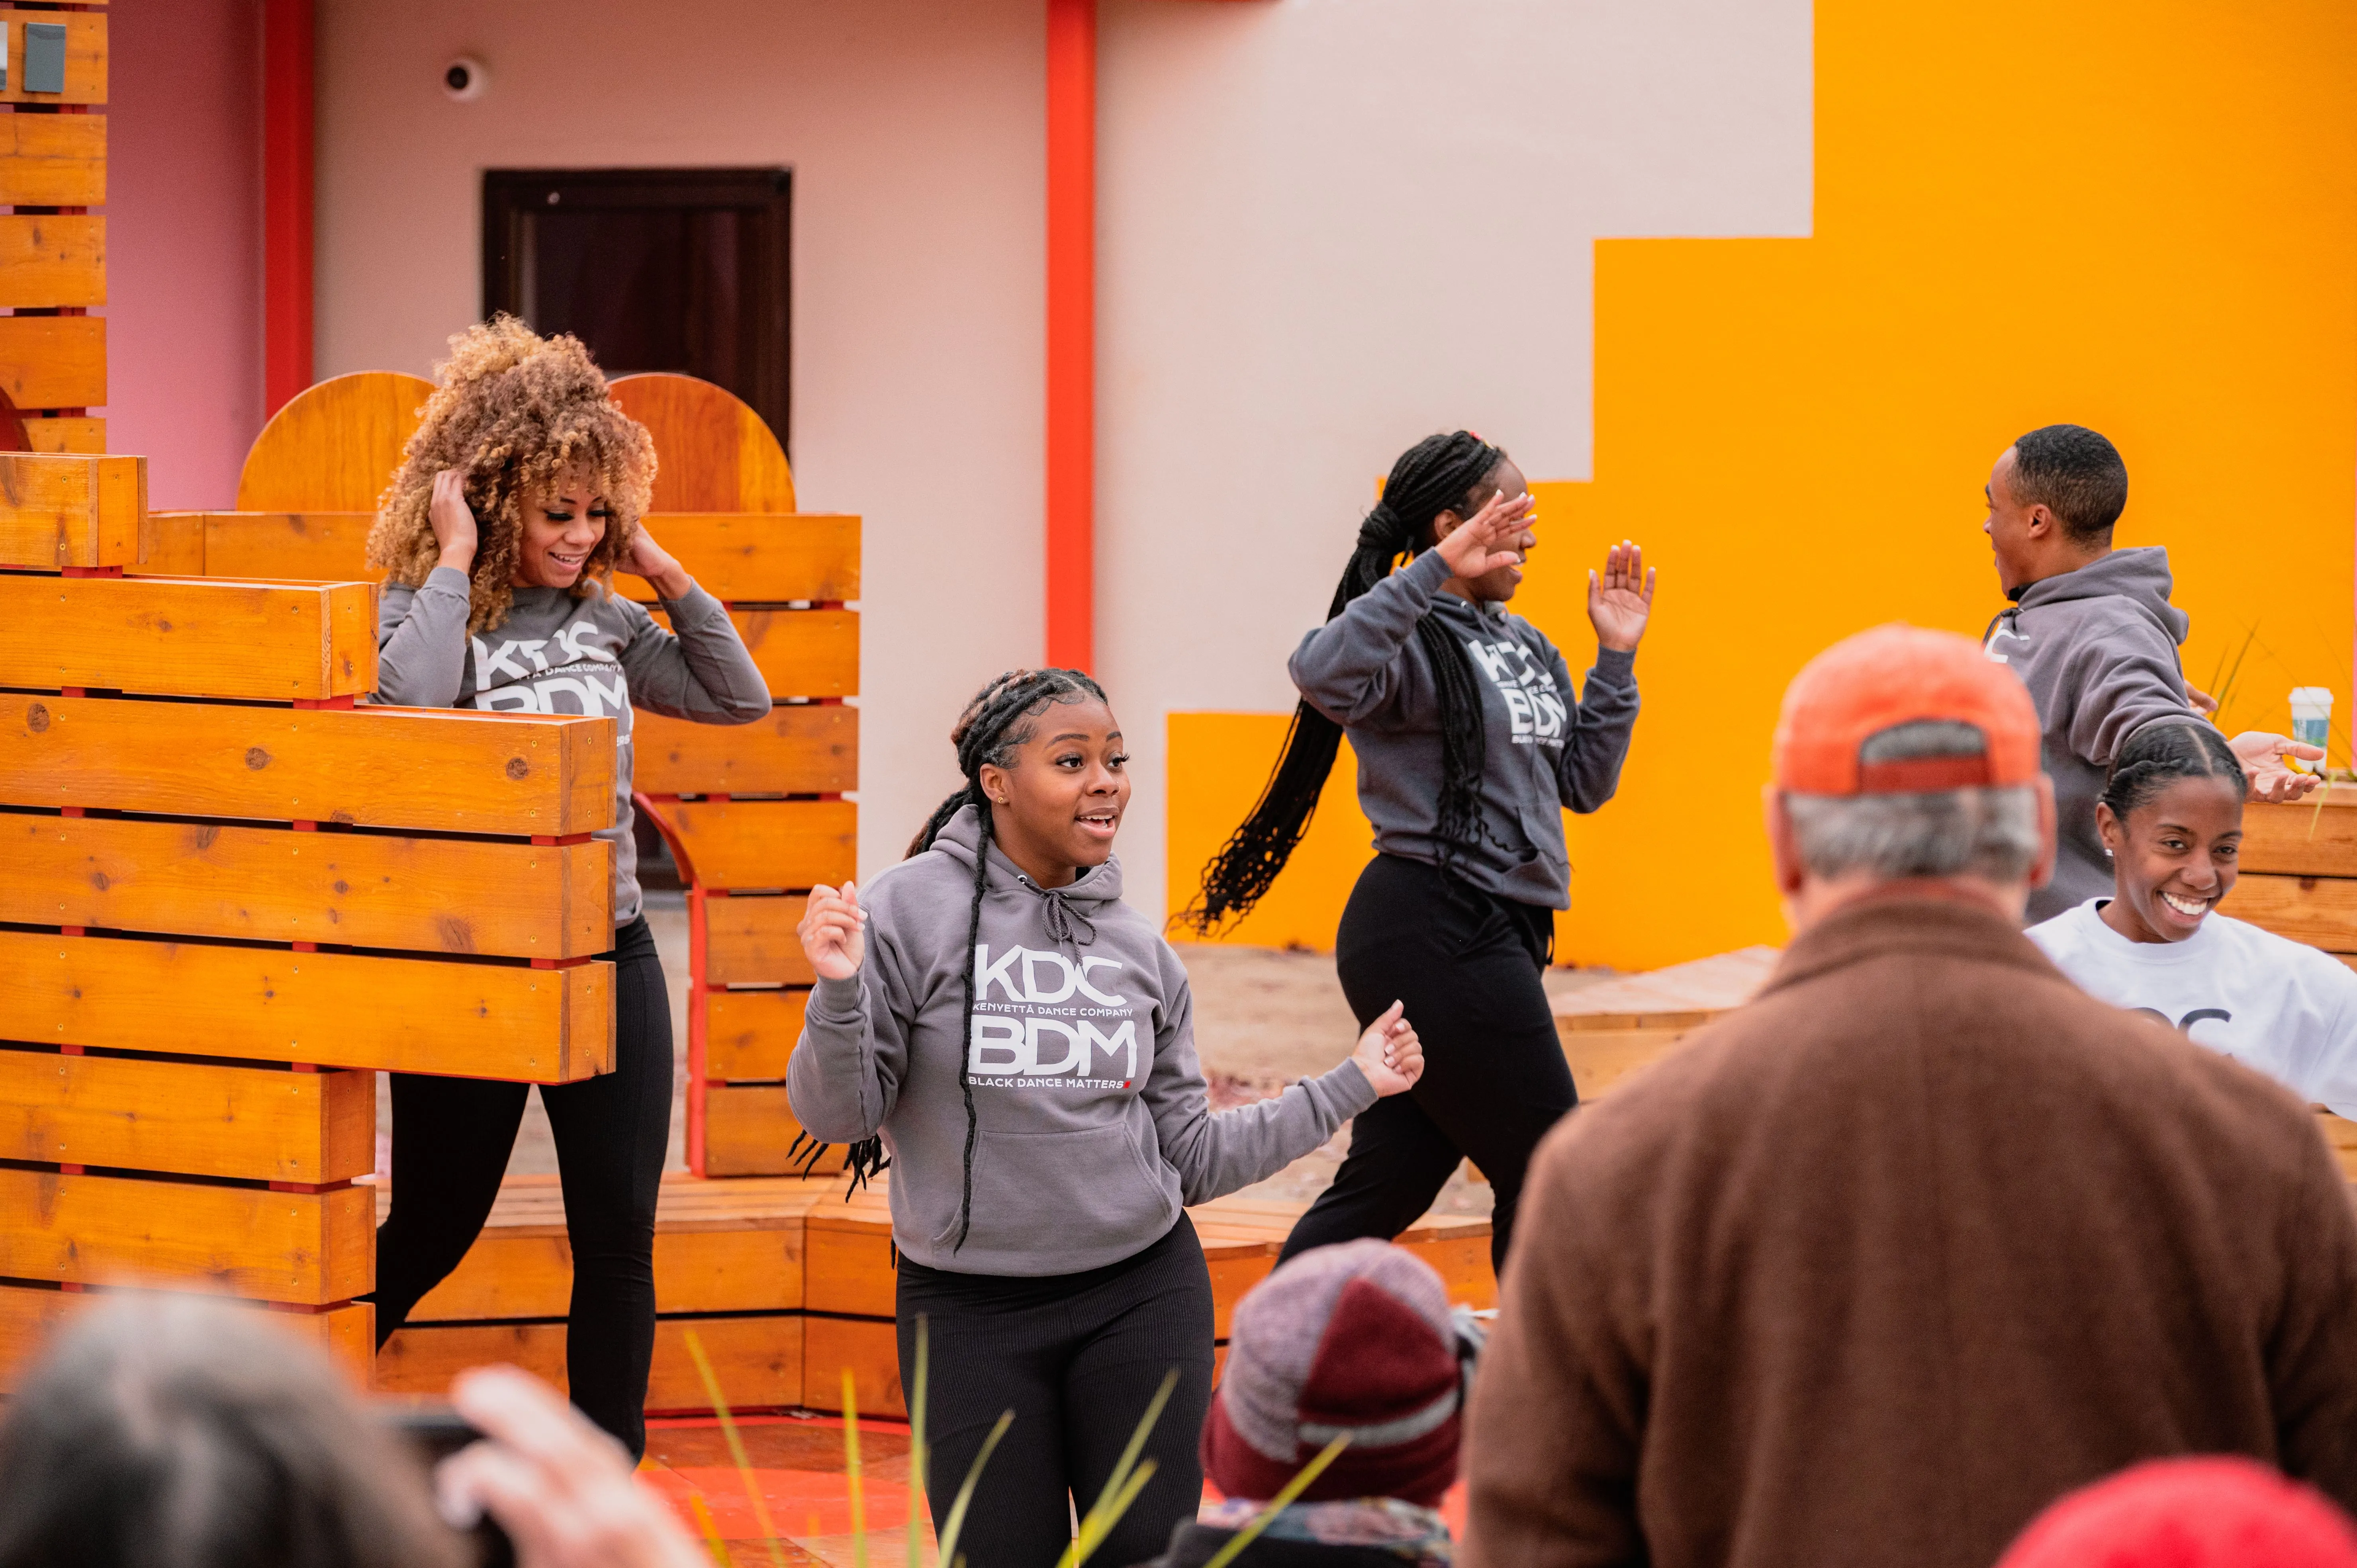 People dancing on the street with a vibrant orange backdrop and wooden pallets.